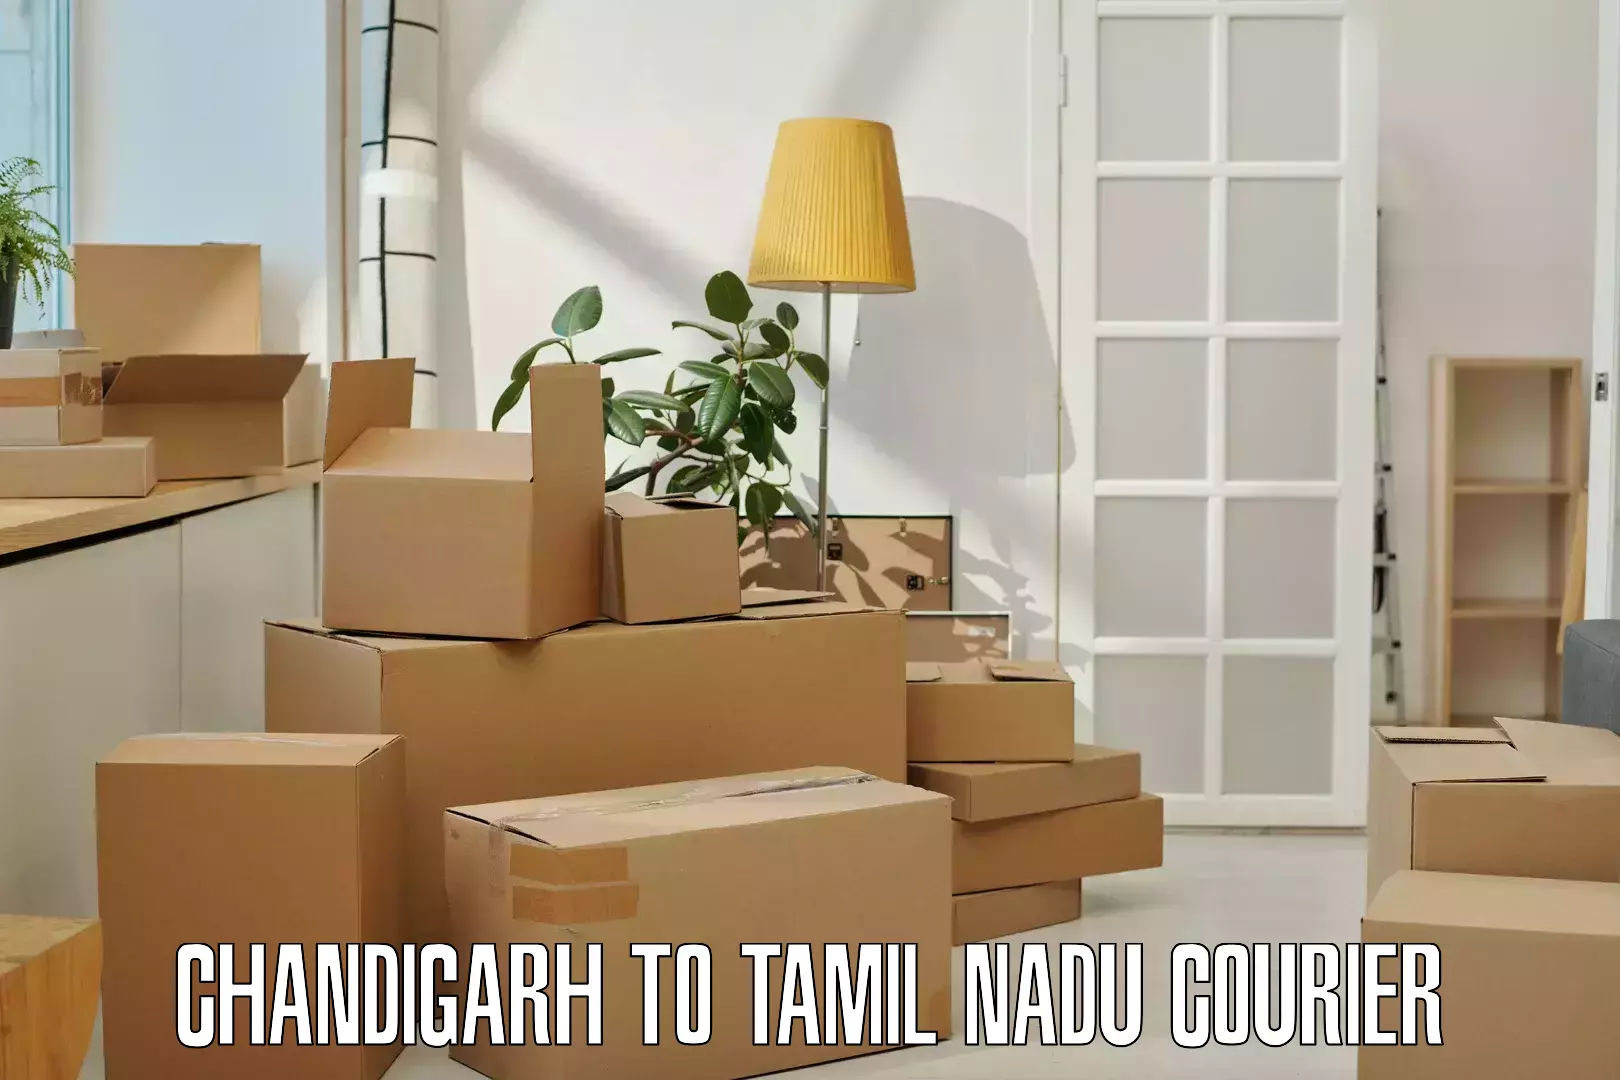 Cost-effective courier options Chandigarh to Tamil Nadu